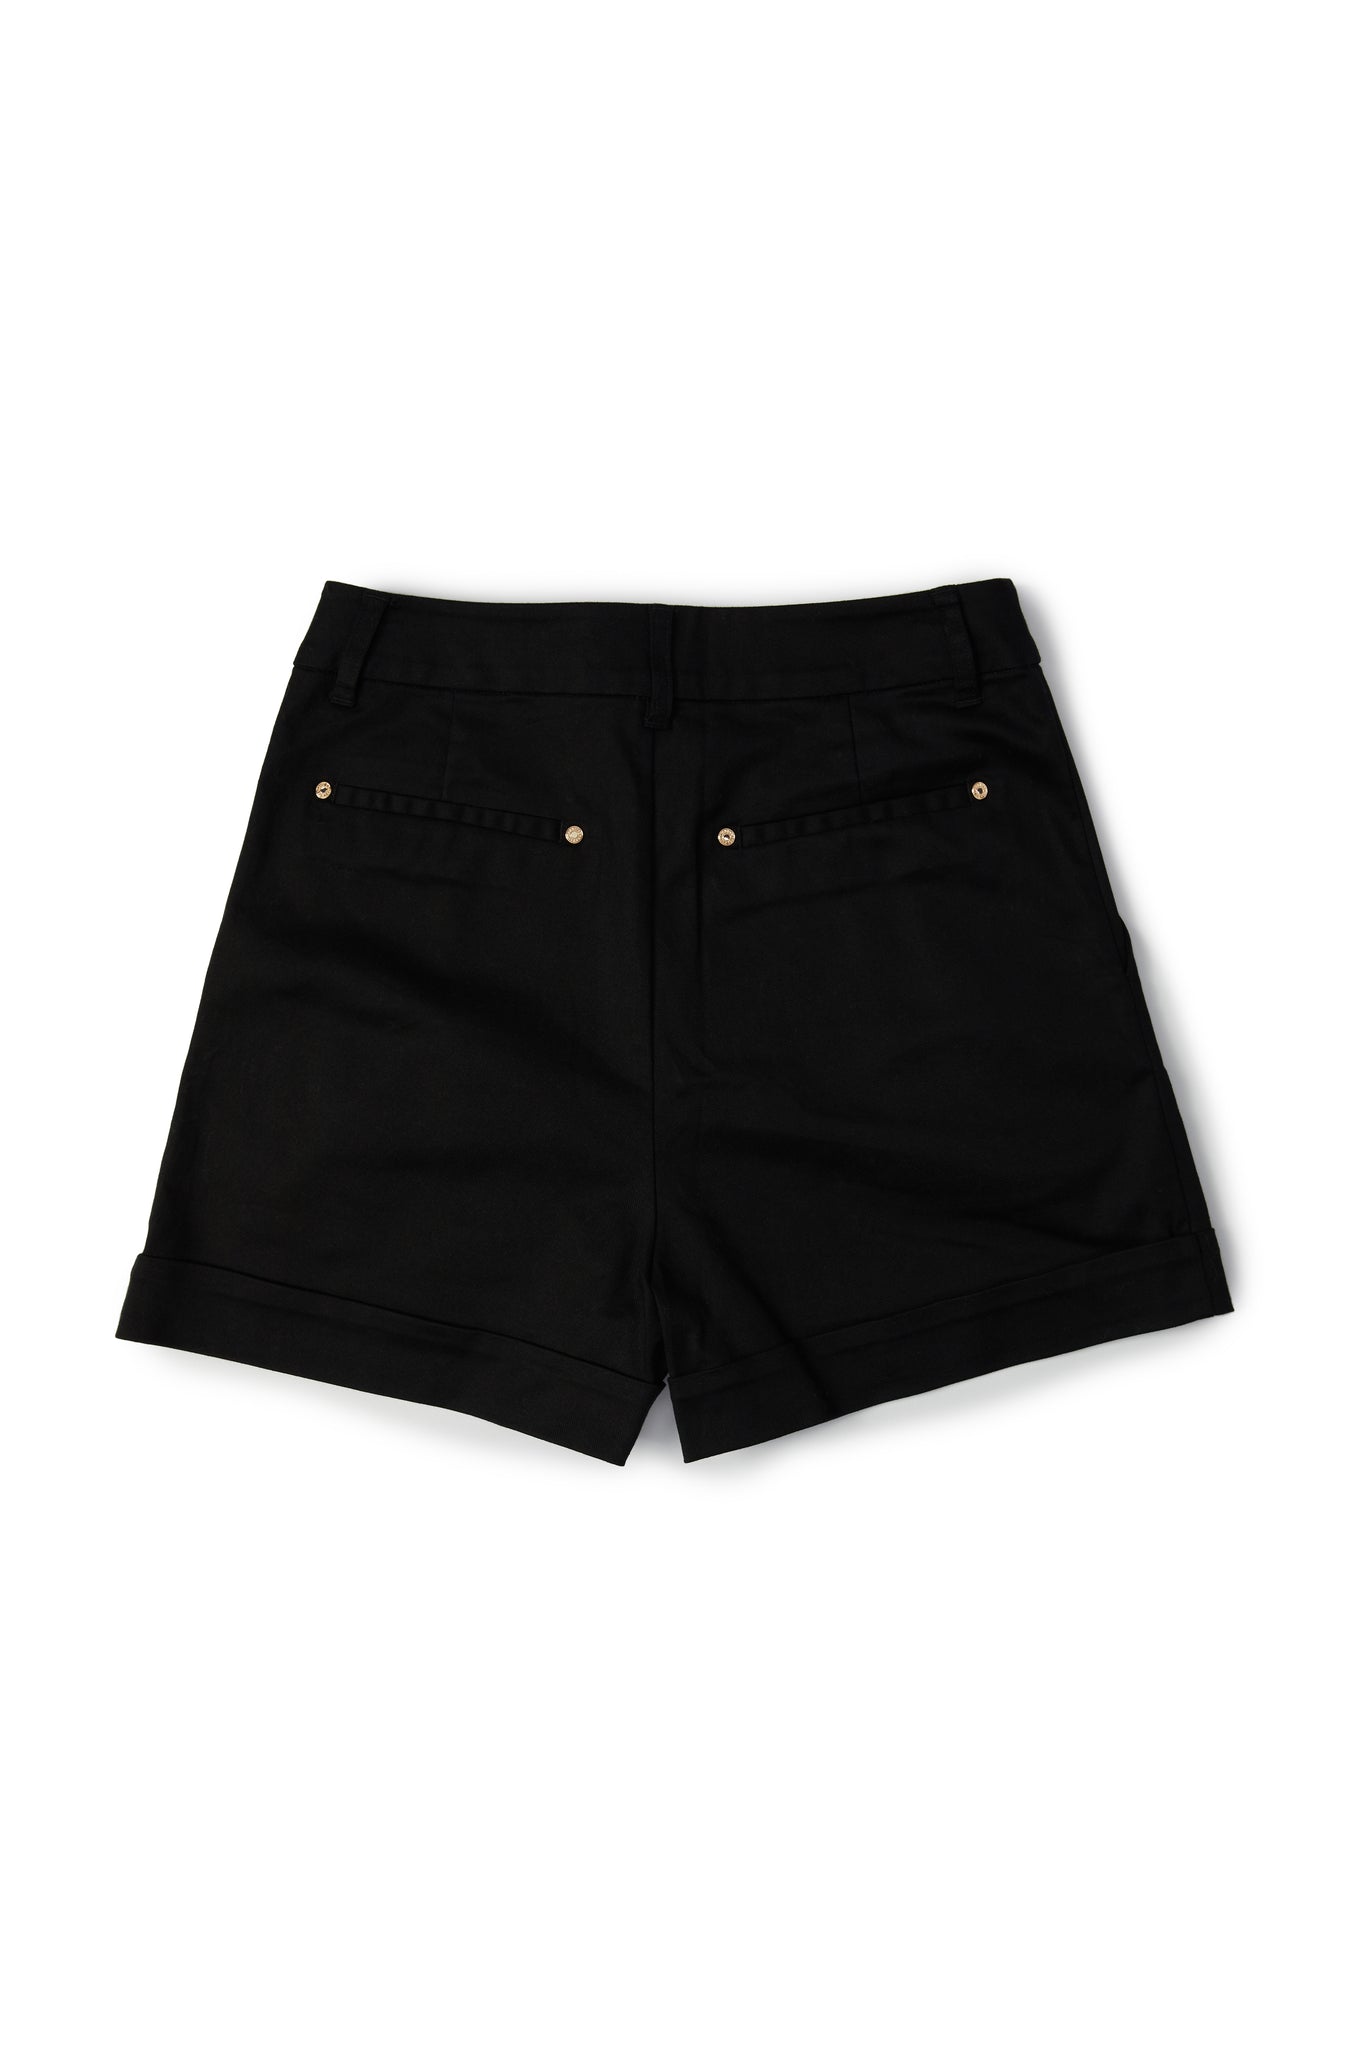 back of womens black high rise tailored shorts with decorative gold rivets that follow the pocket line in a sailor style with a turned up hem